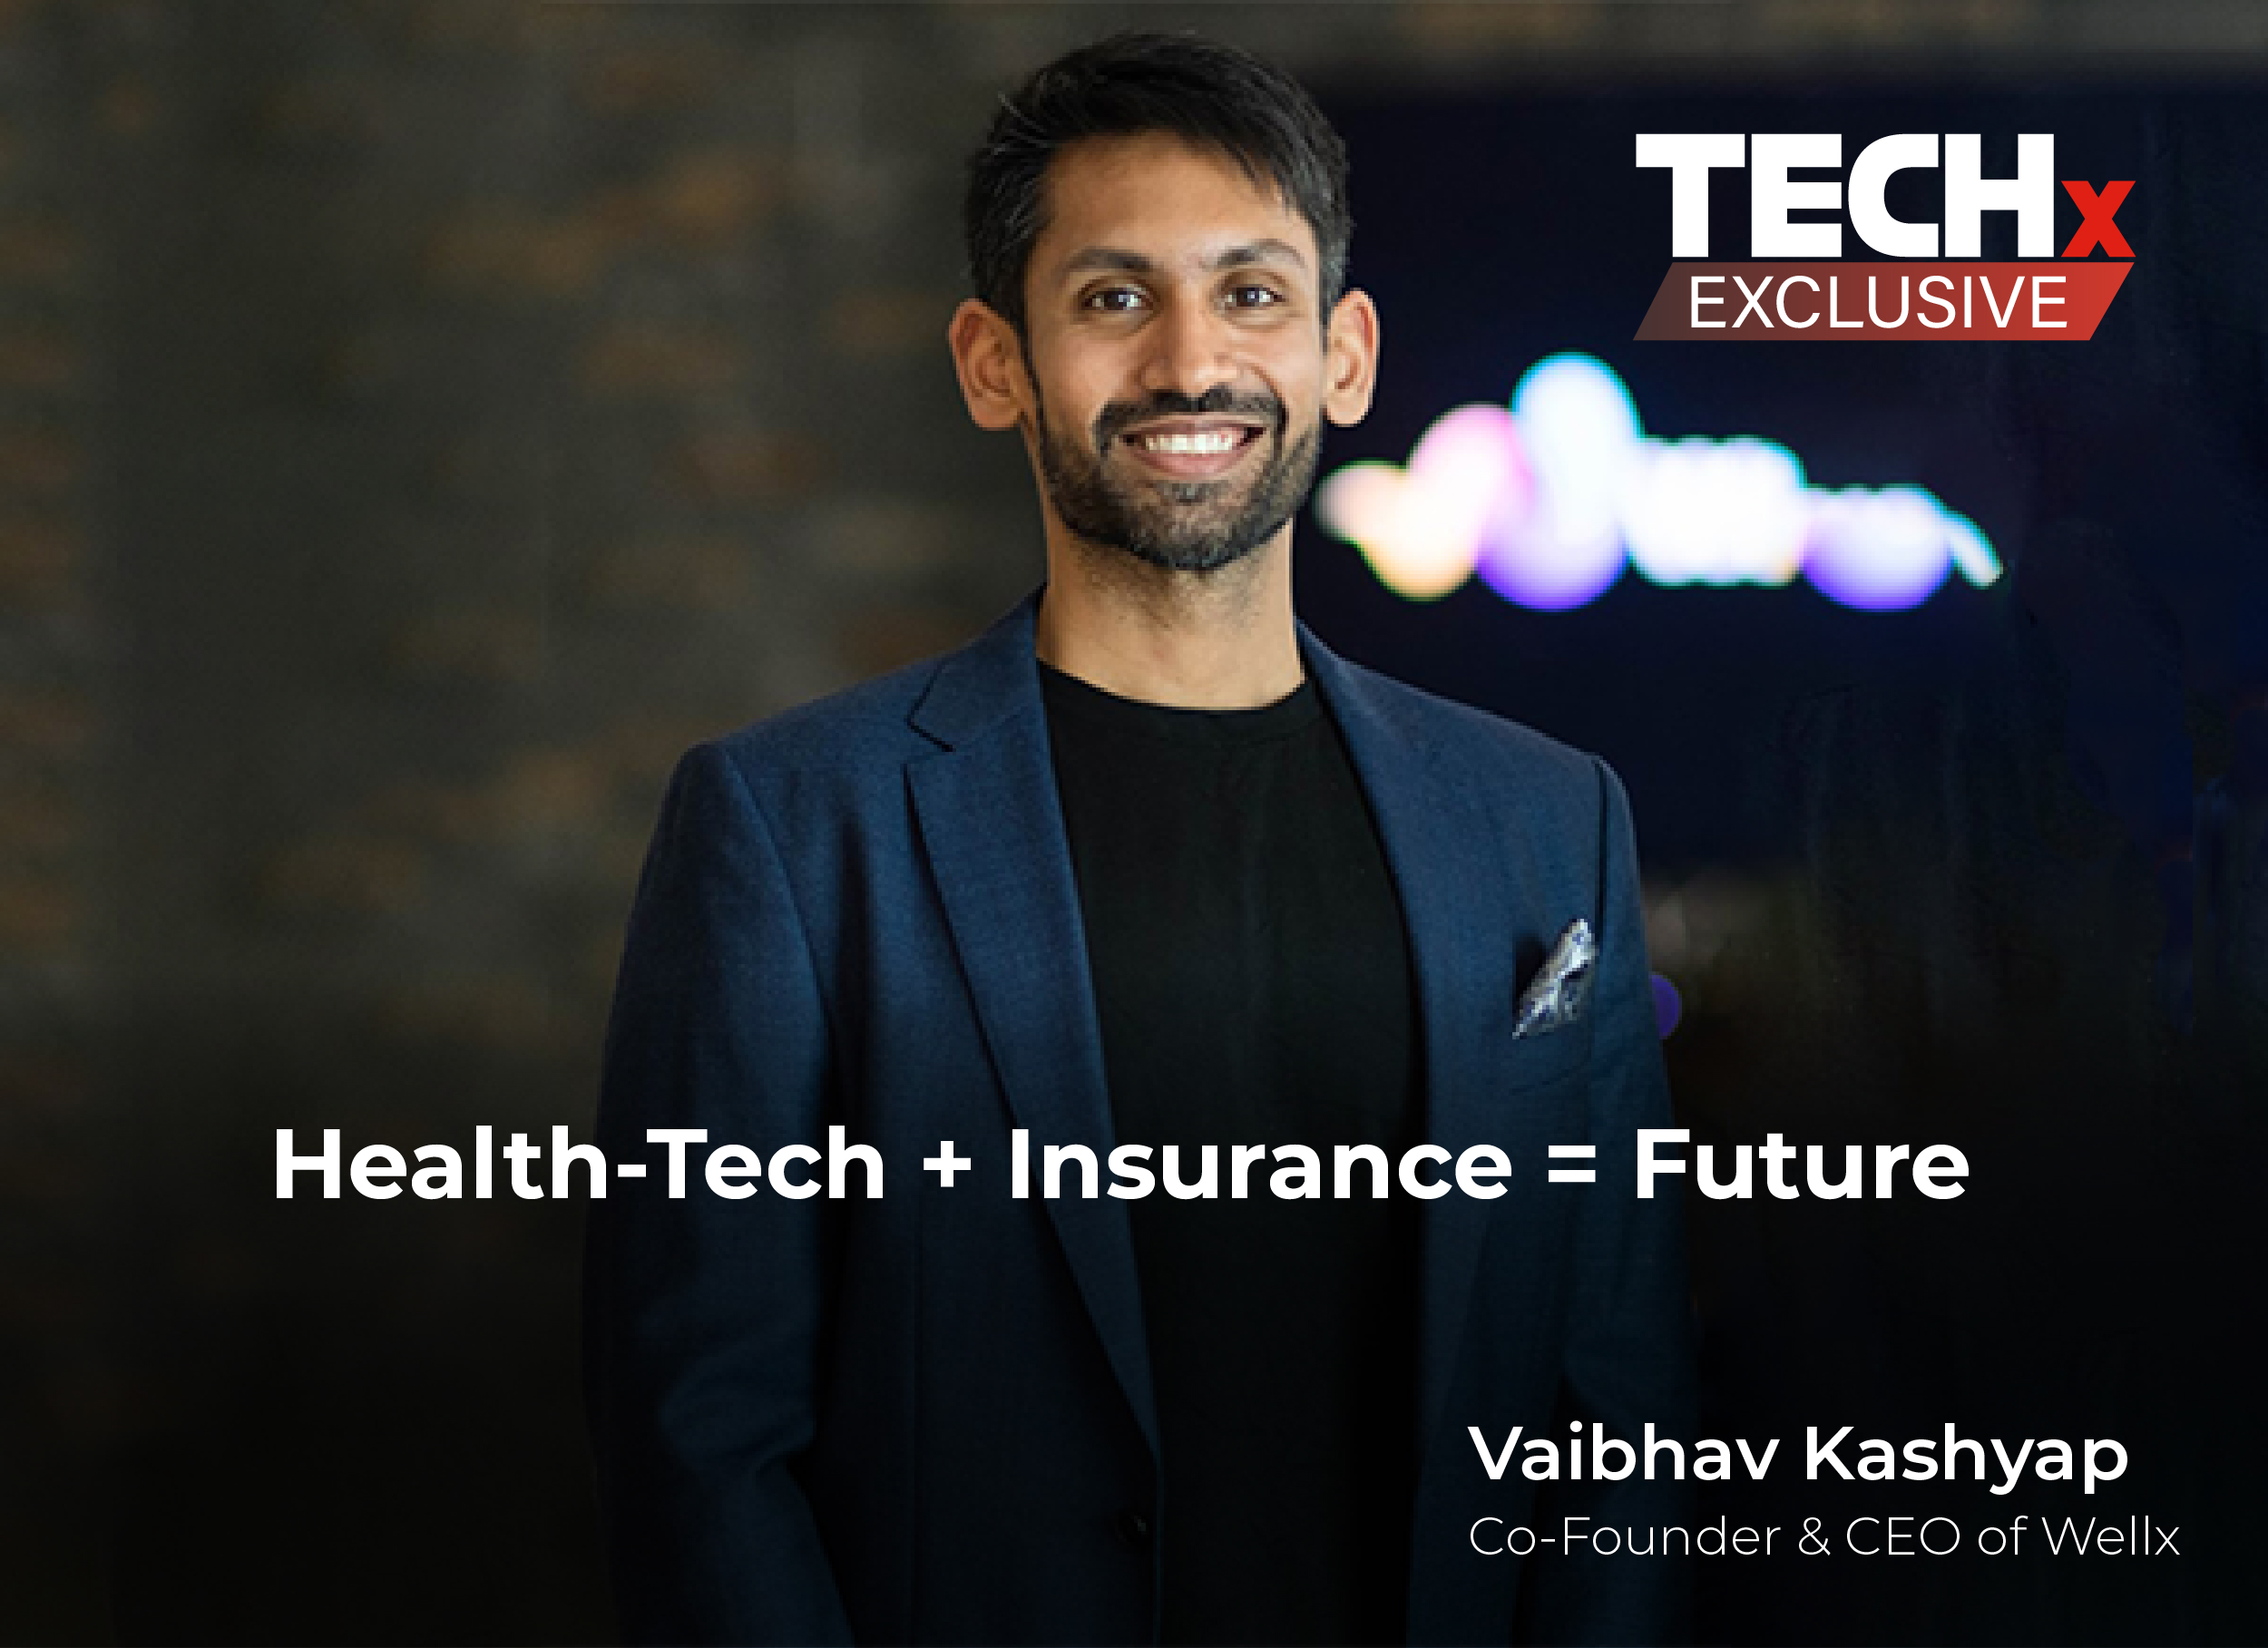 Vaibhav Kashyap, CEO & Co-founder, Wellx